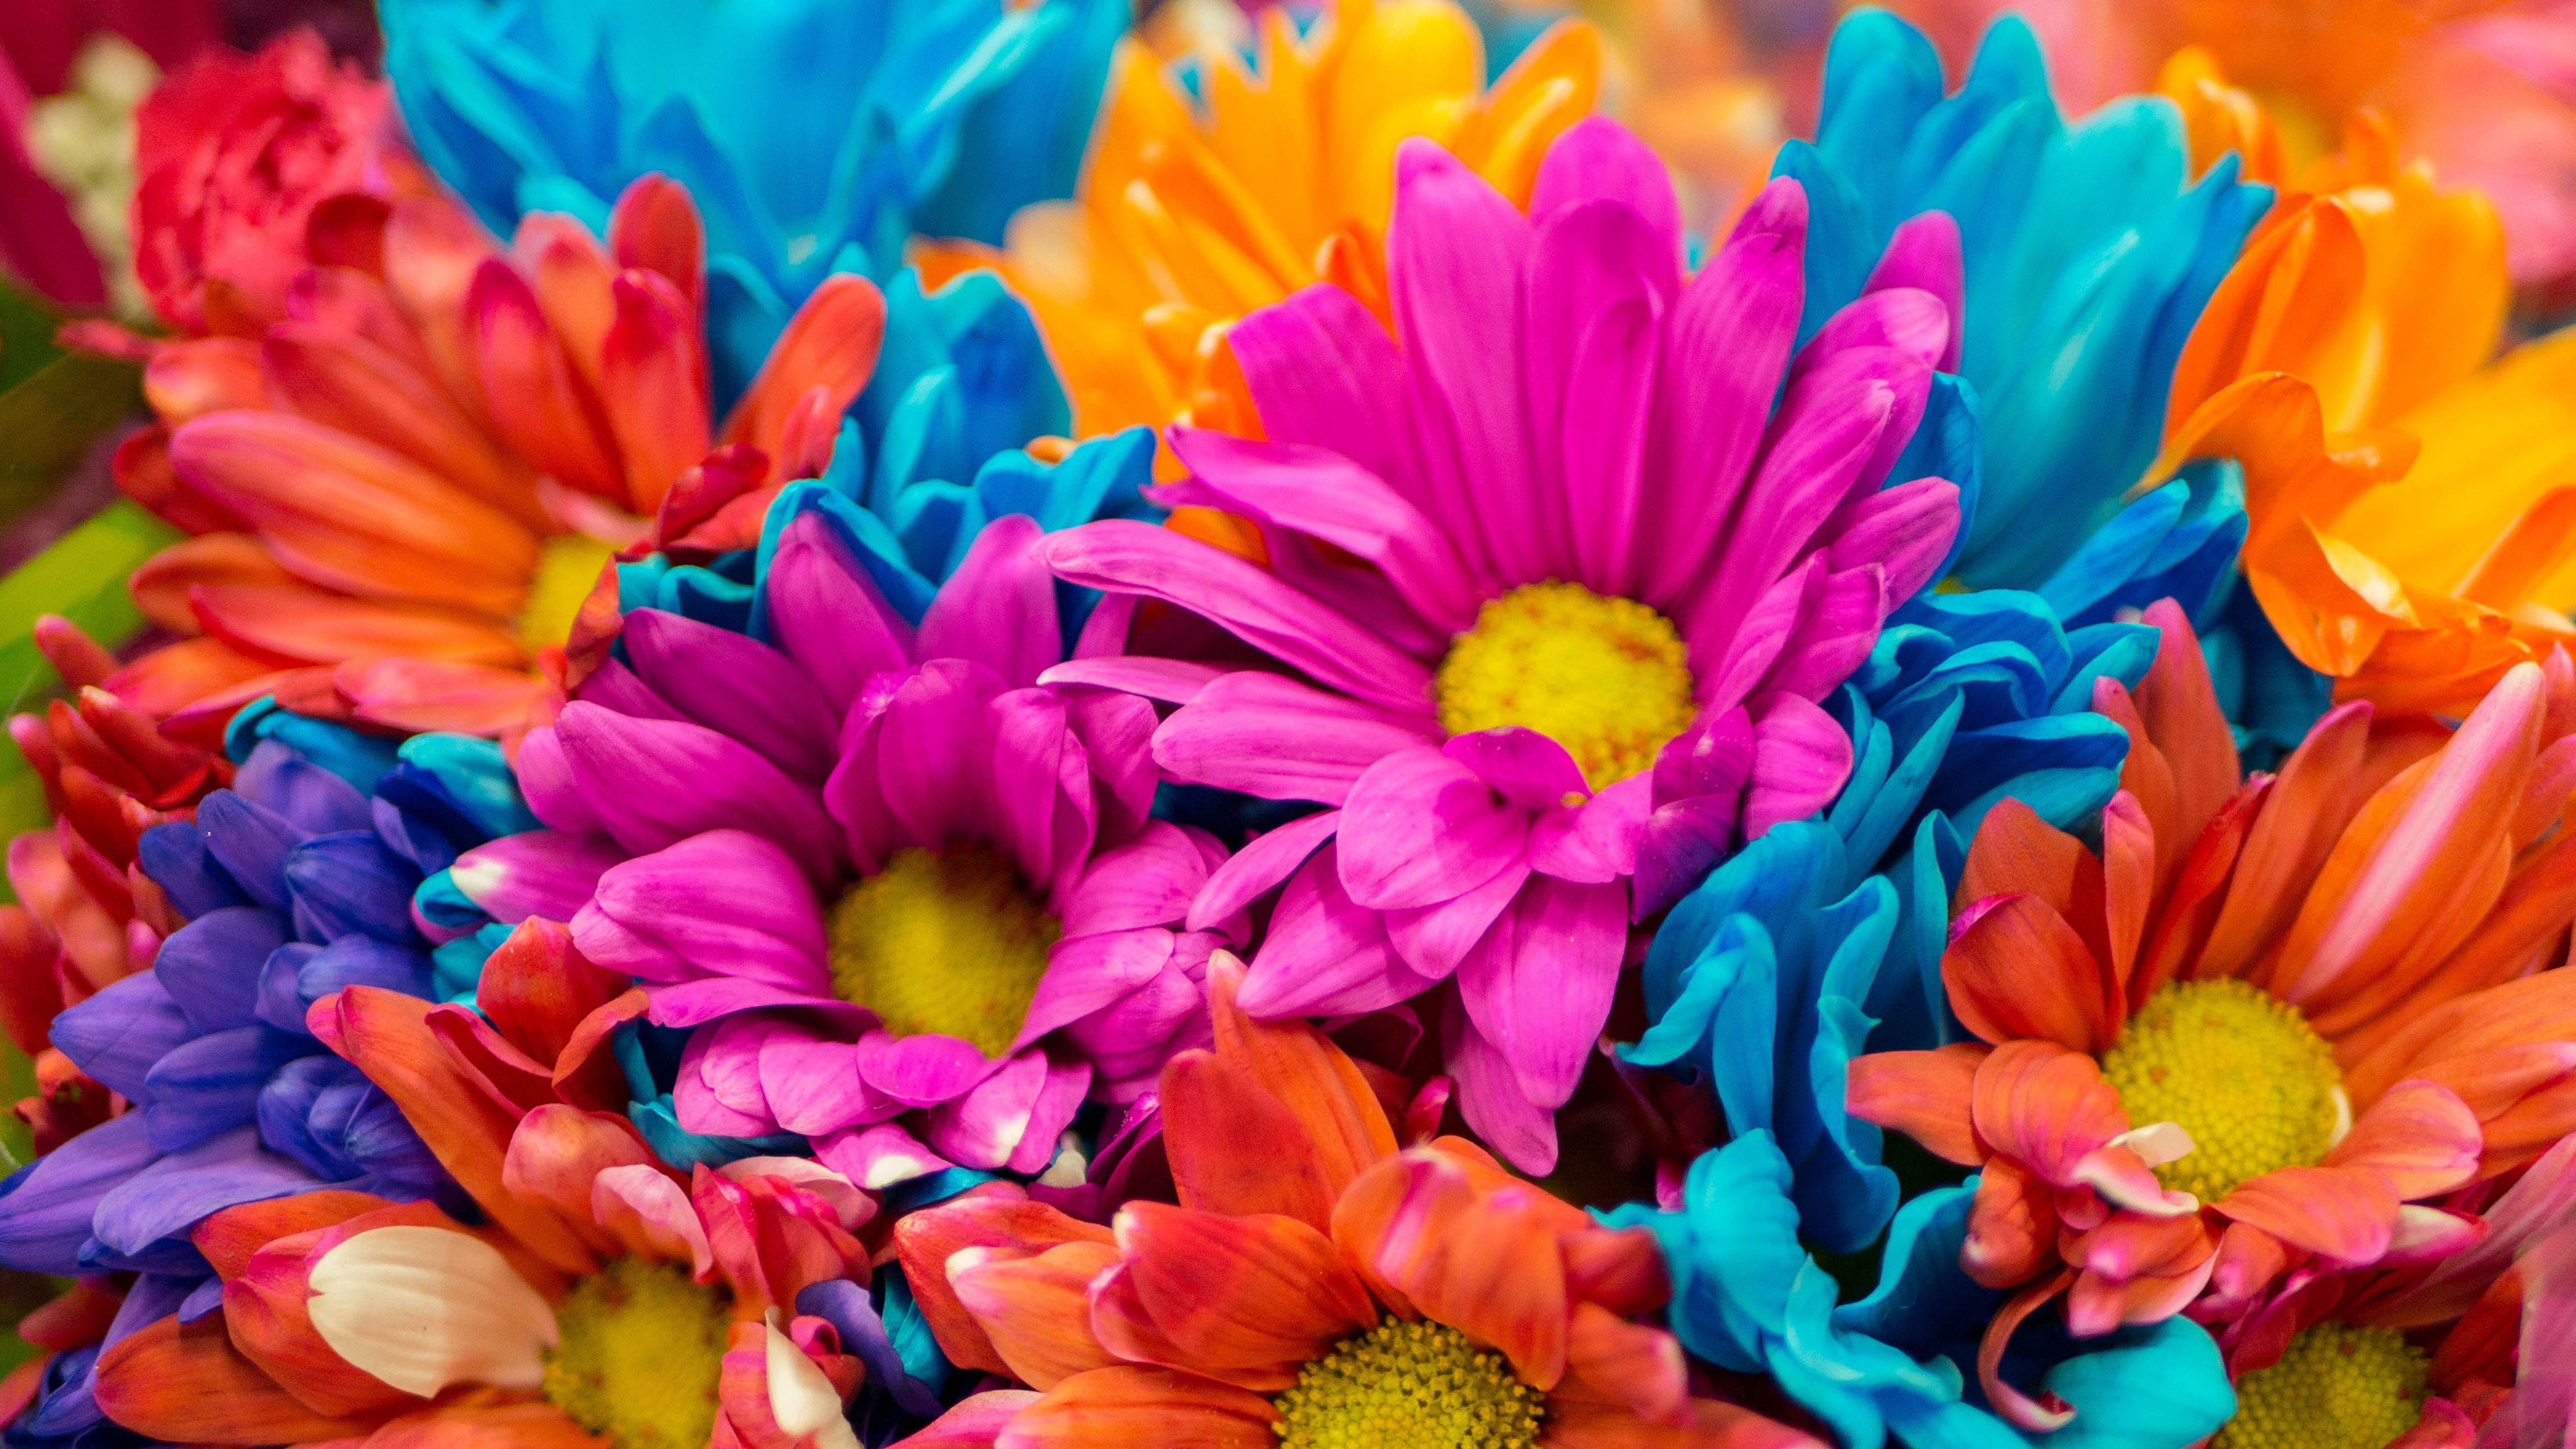 Colorful Flower 4k Wallpapers - Wallpaper Cave